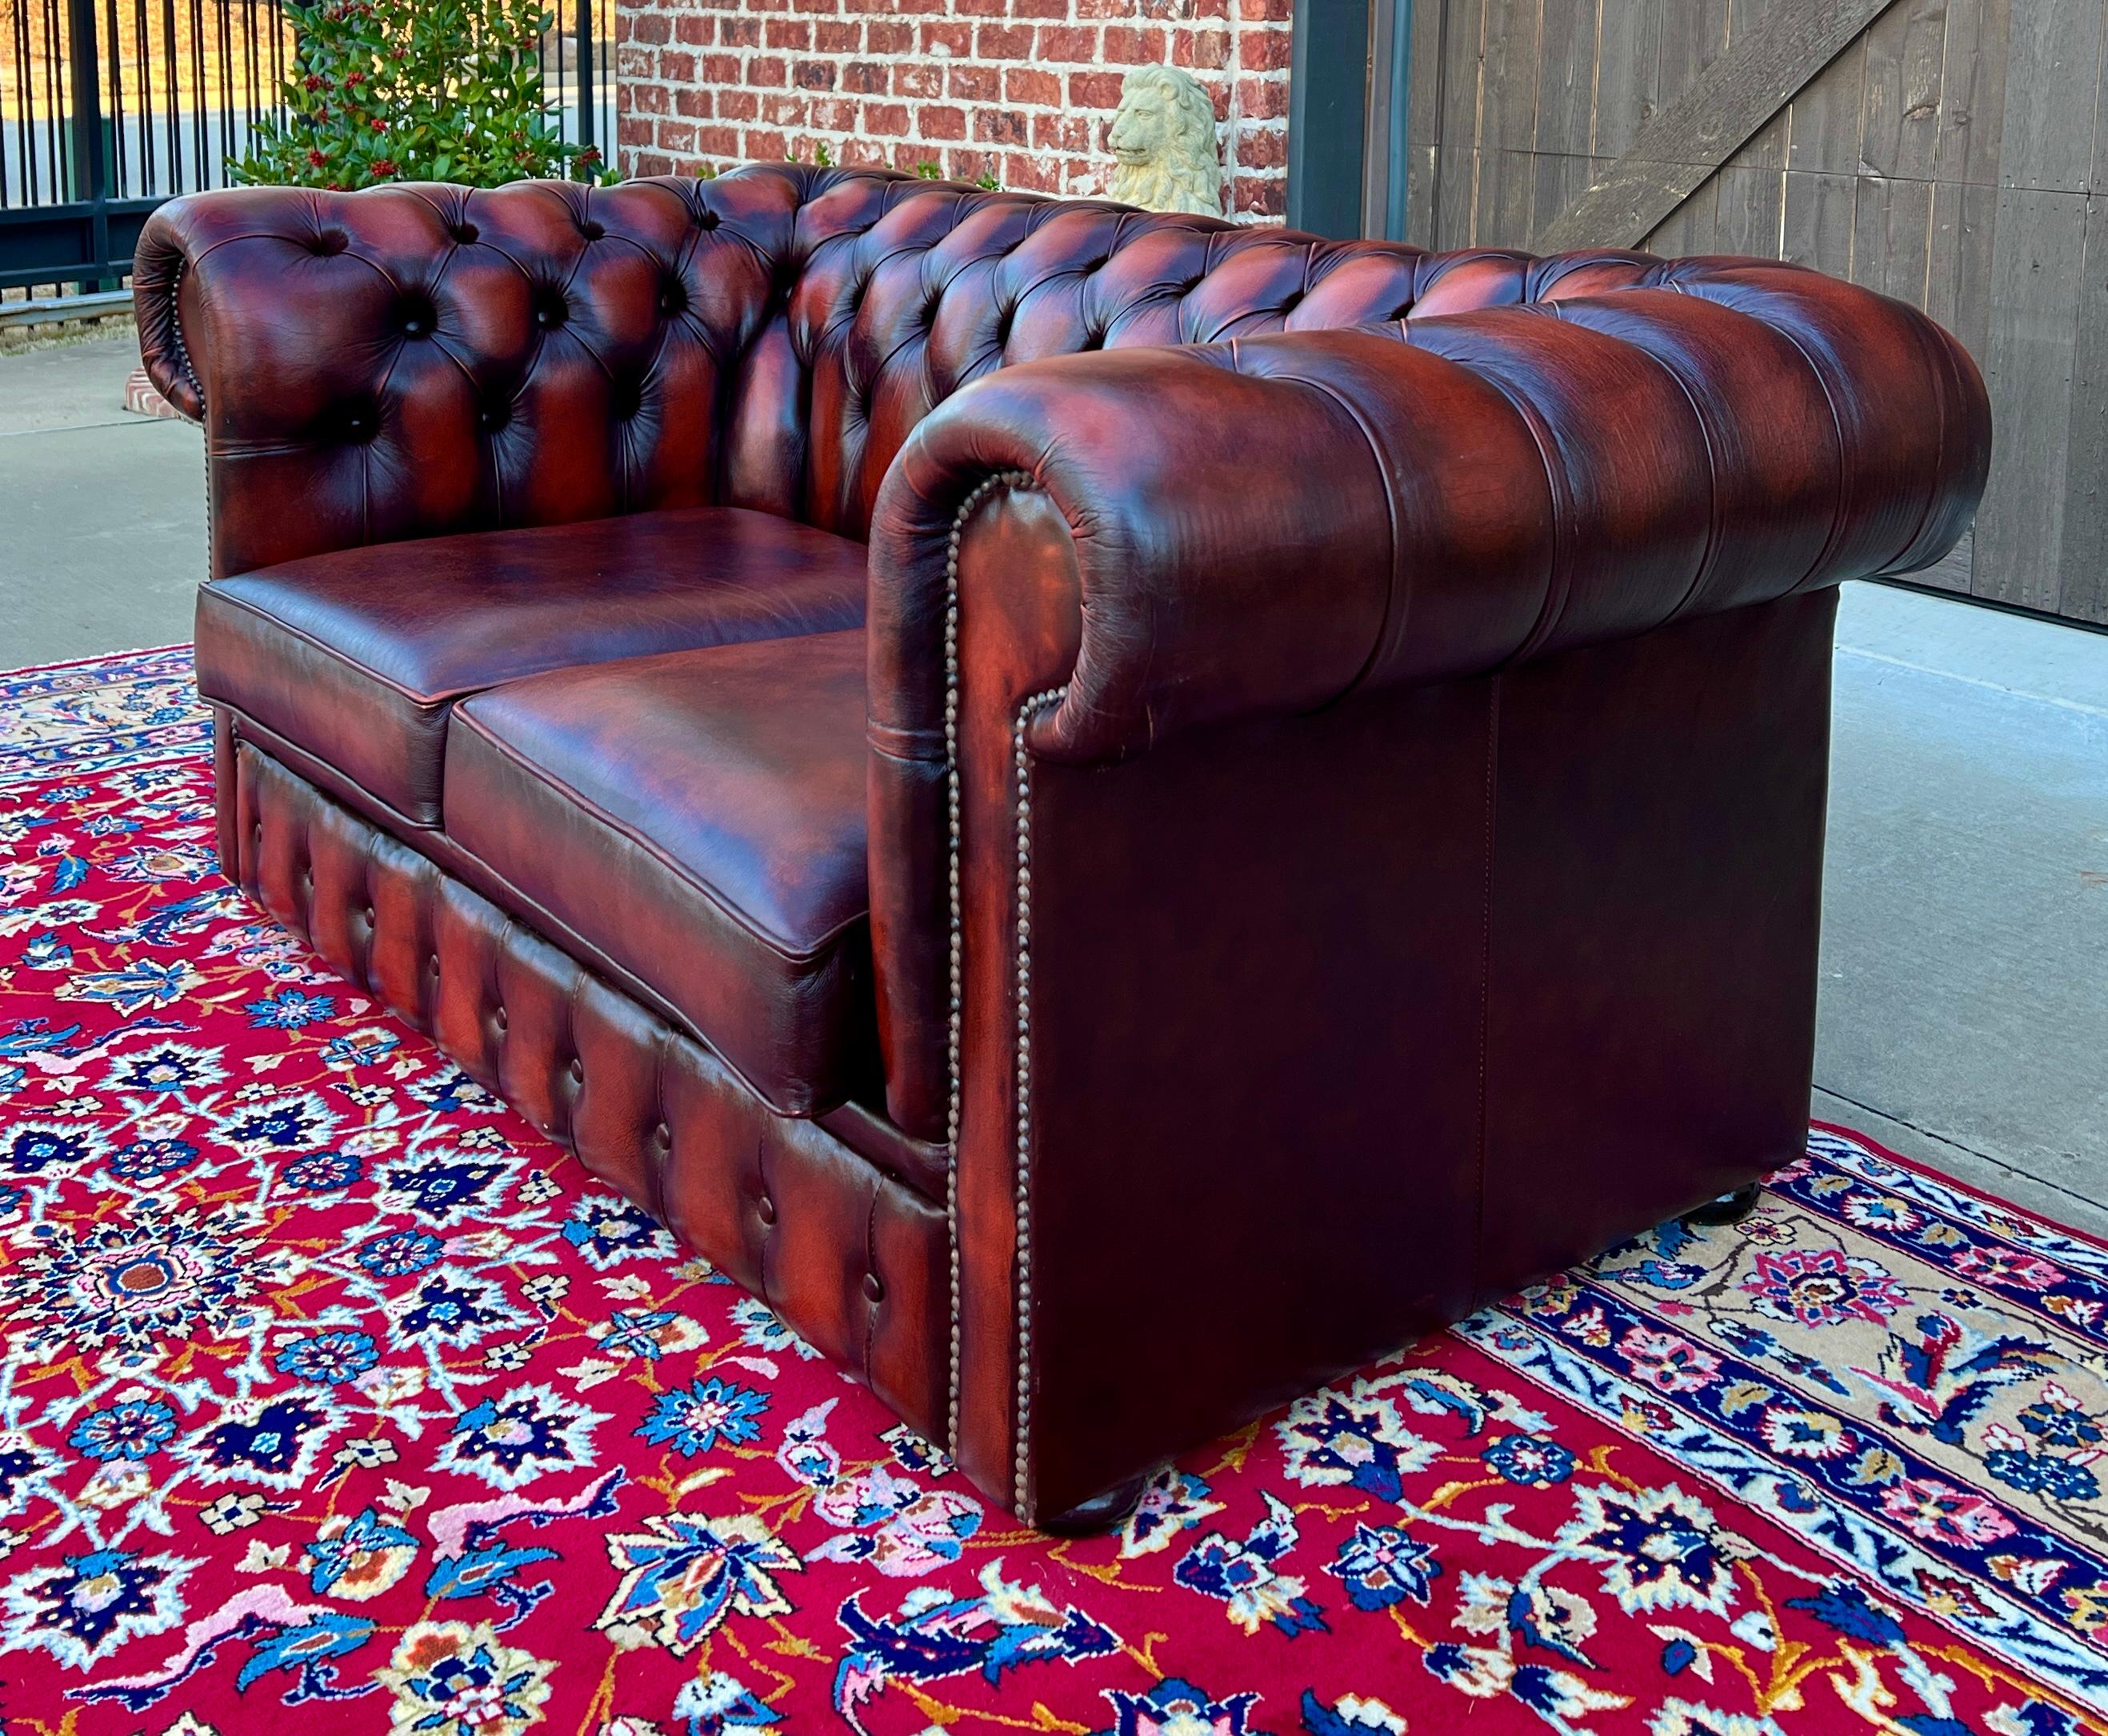 Vintage English Chesterfield Leather Tufted Love Seat Sofa Oxblood Red #1 For Sale 6